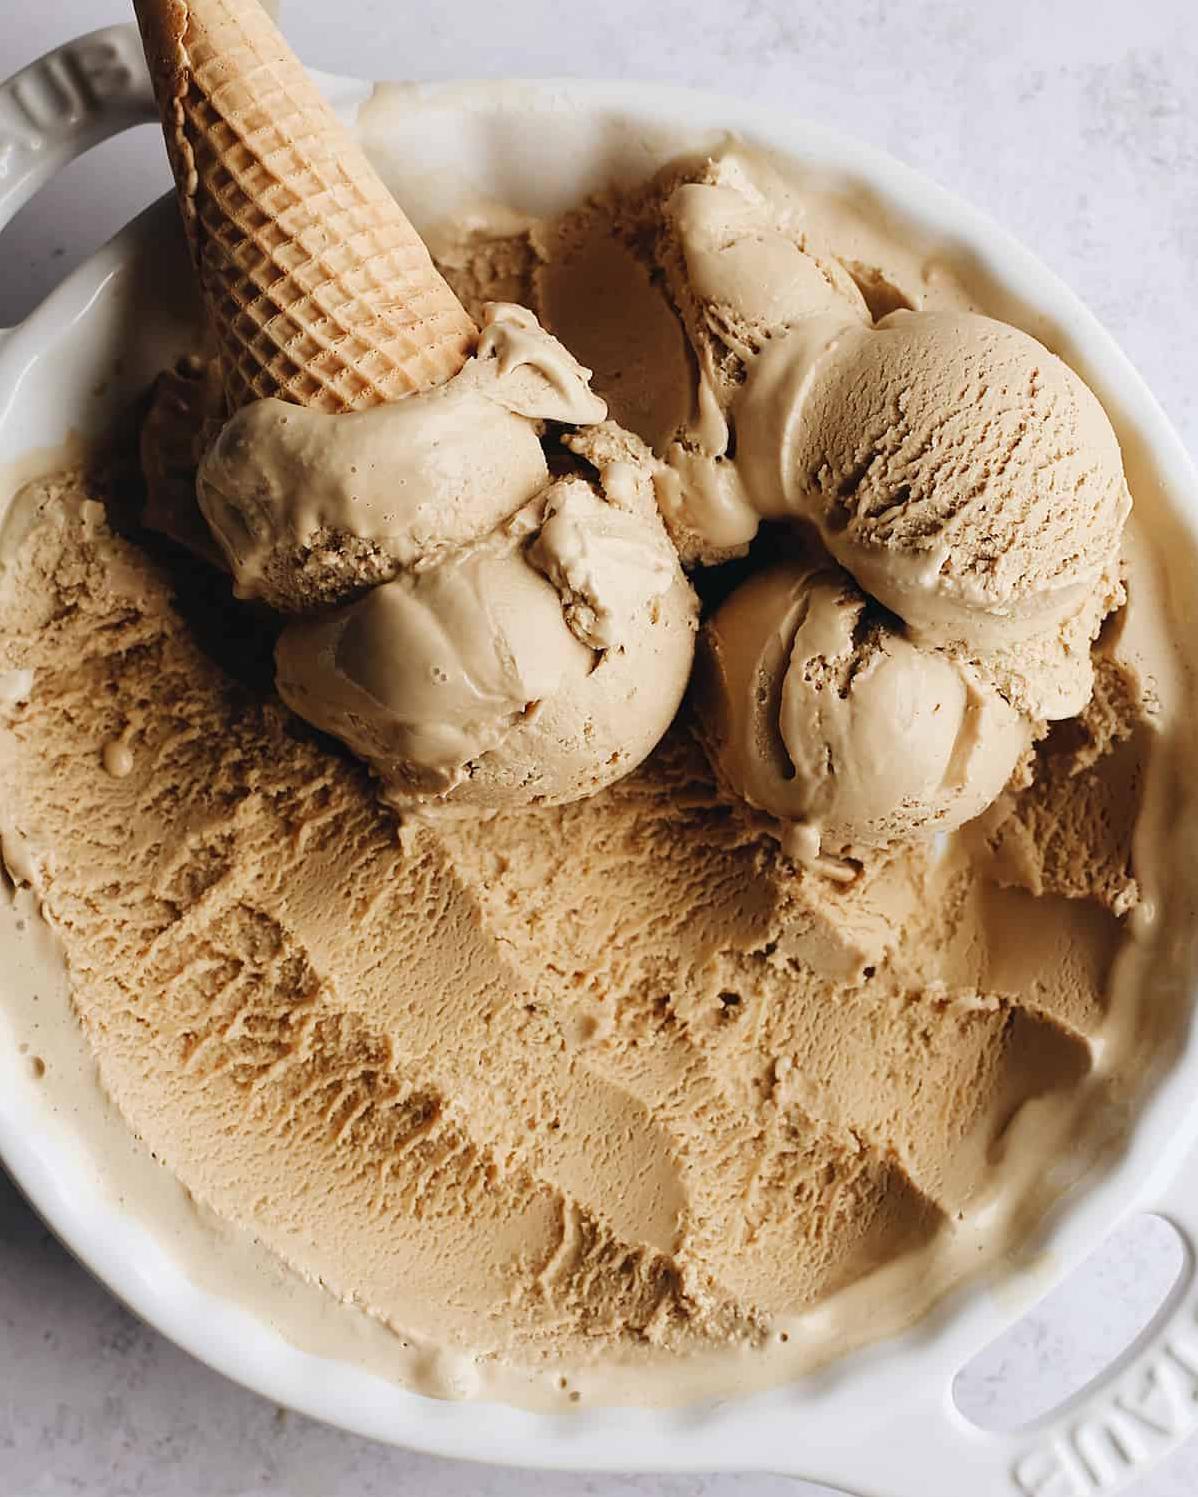  Cool off with a scoop of this refreshing coffee ice cream!